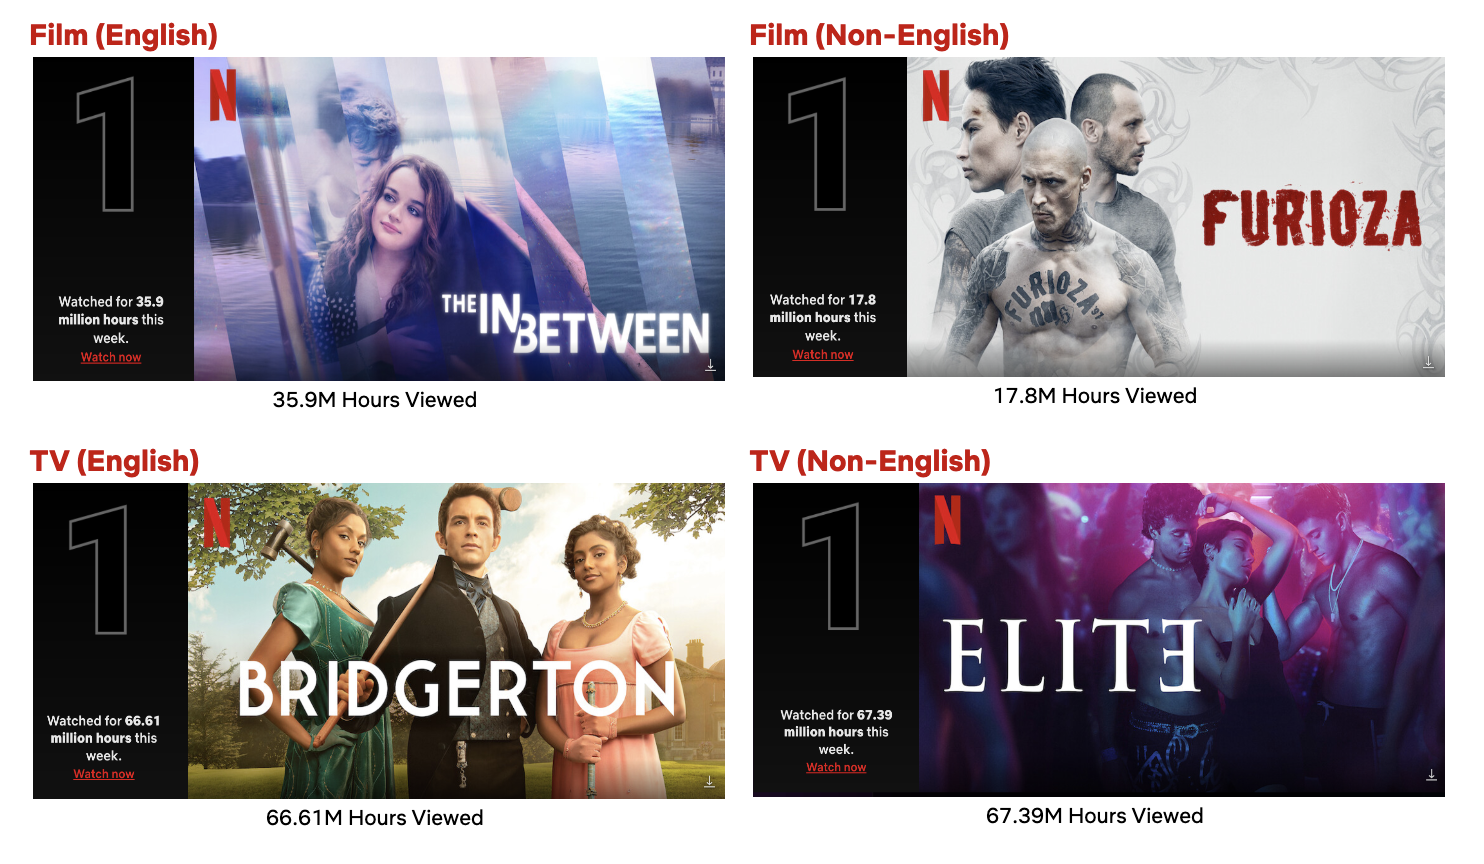 Top 10 Week of April 11: ‘Elite’ Is the Most Viewed Title of the Week,  ‘Bridgerton’ Takes the Top 2 Spots on the Most Popular List